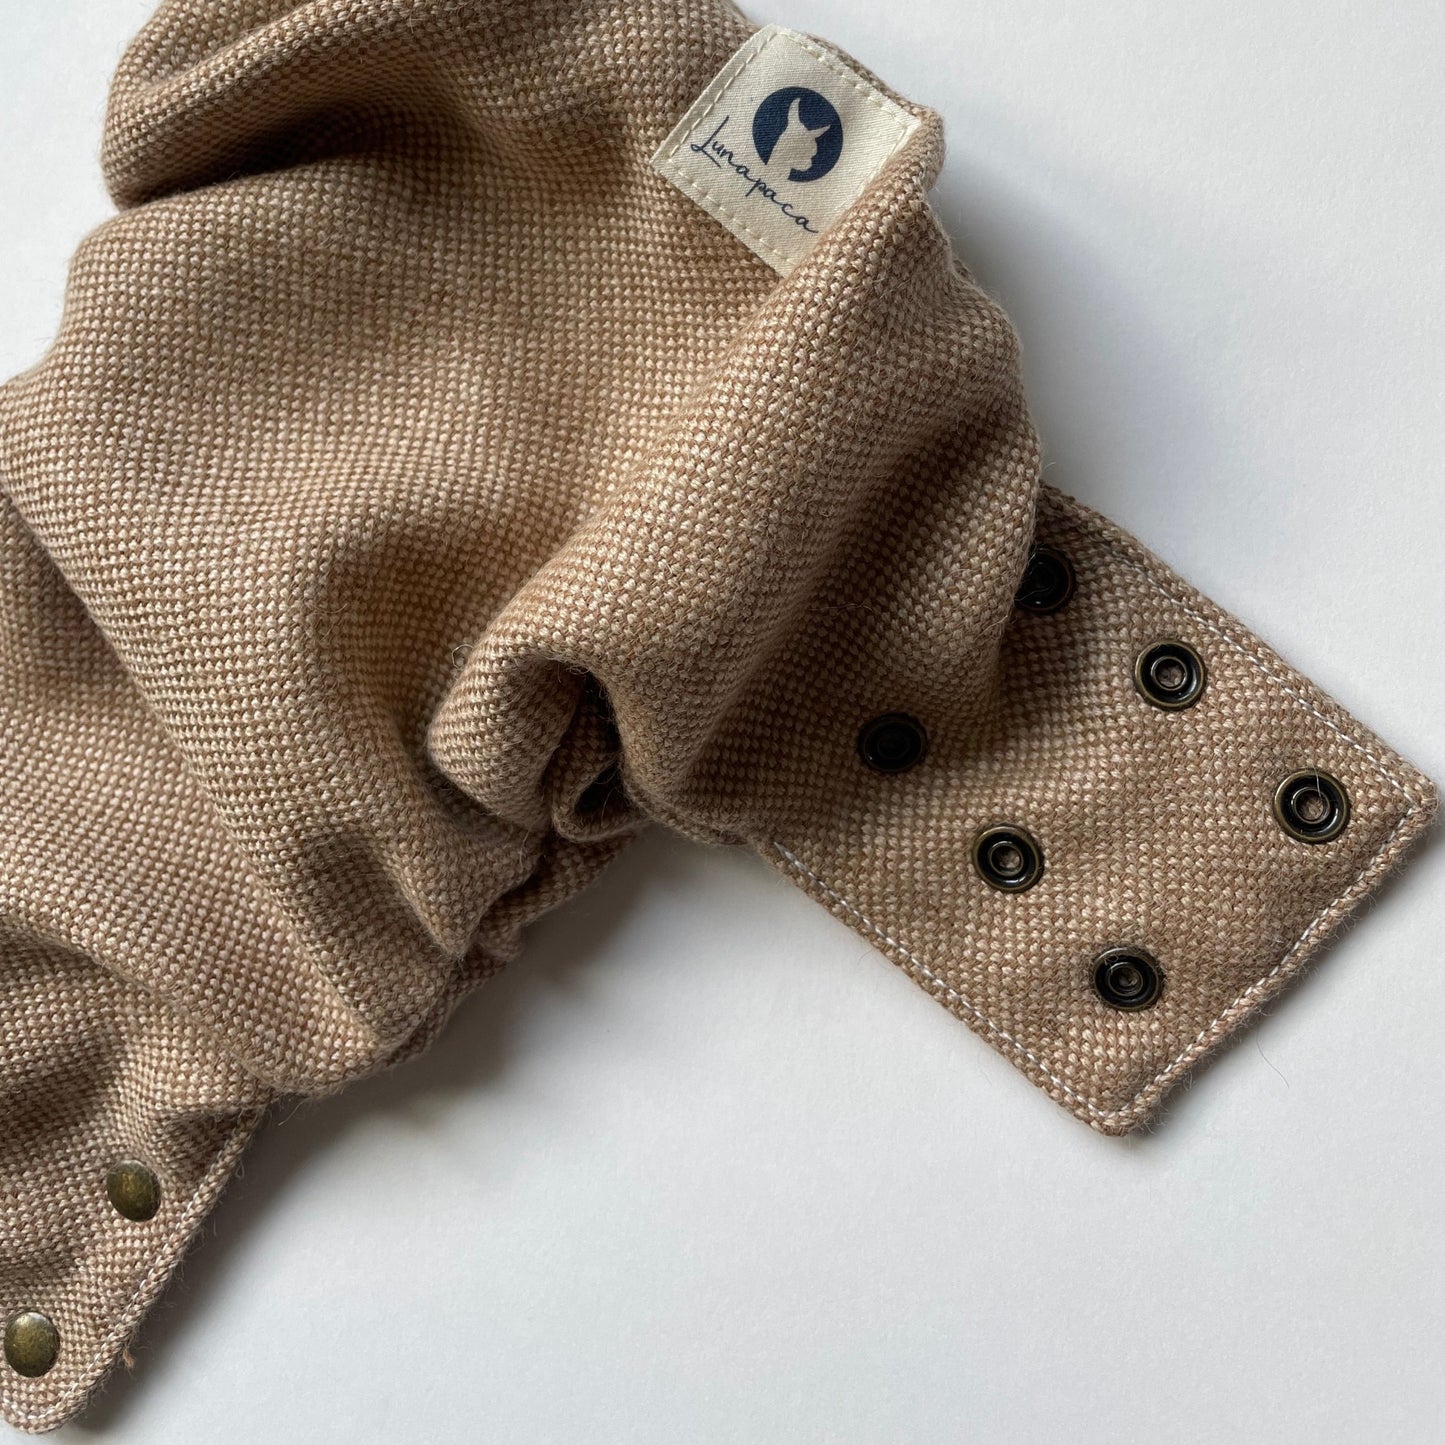 An alpaca diaper cover with a plain weave of light brown and white color lays open on a white background. A white square logo tag featuring an alpaca silhouette and brass snaps along one of the side panels and along the front panel are visible.